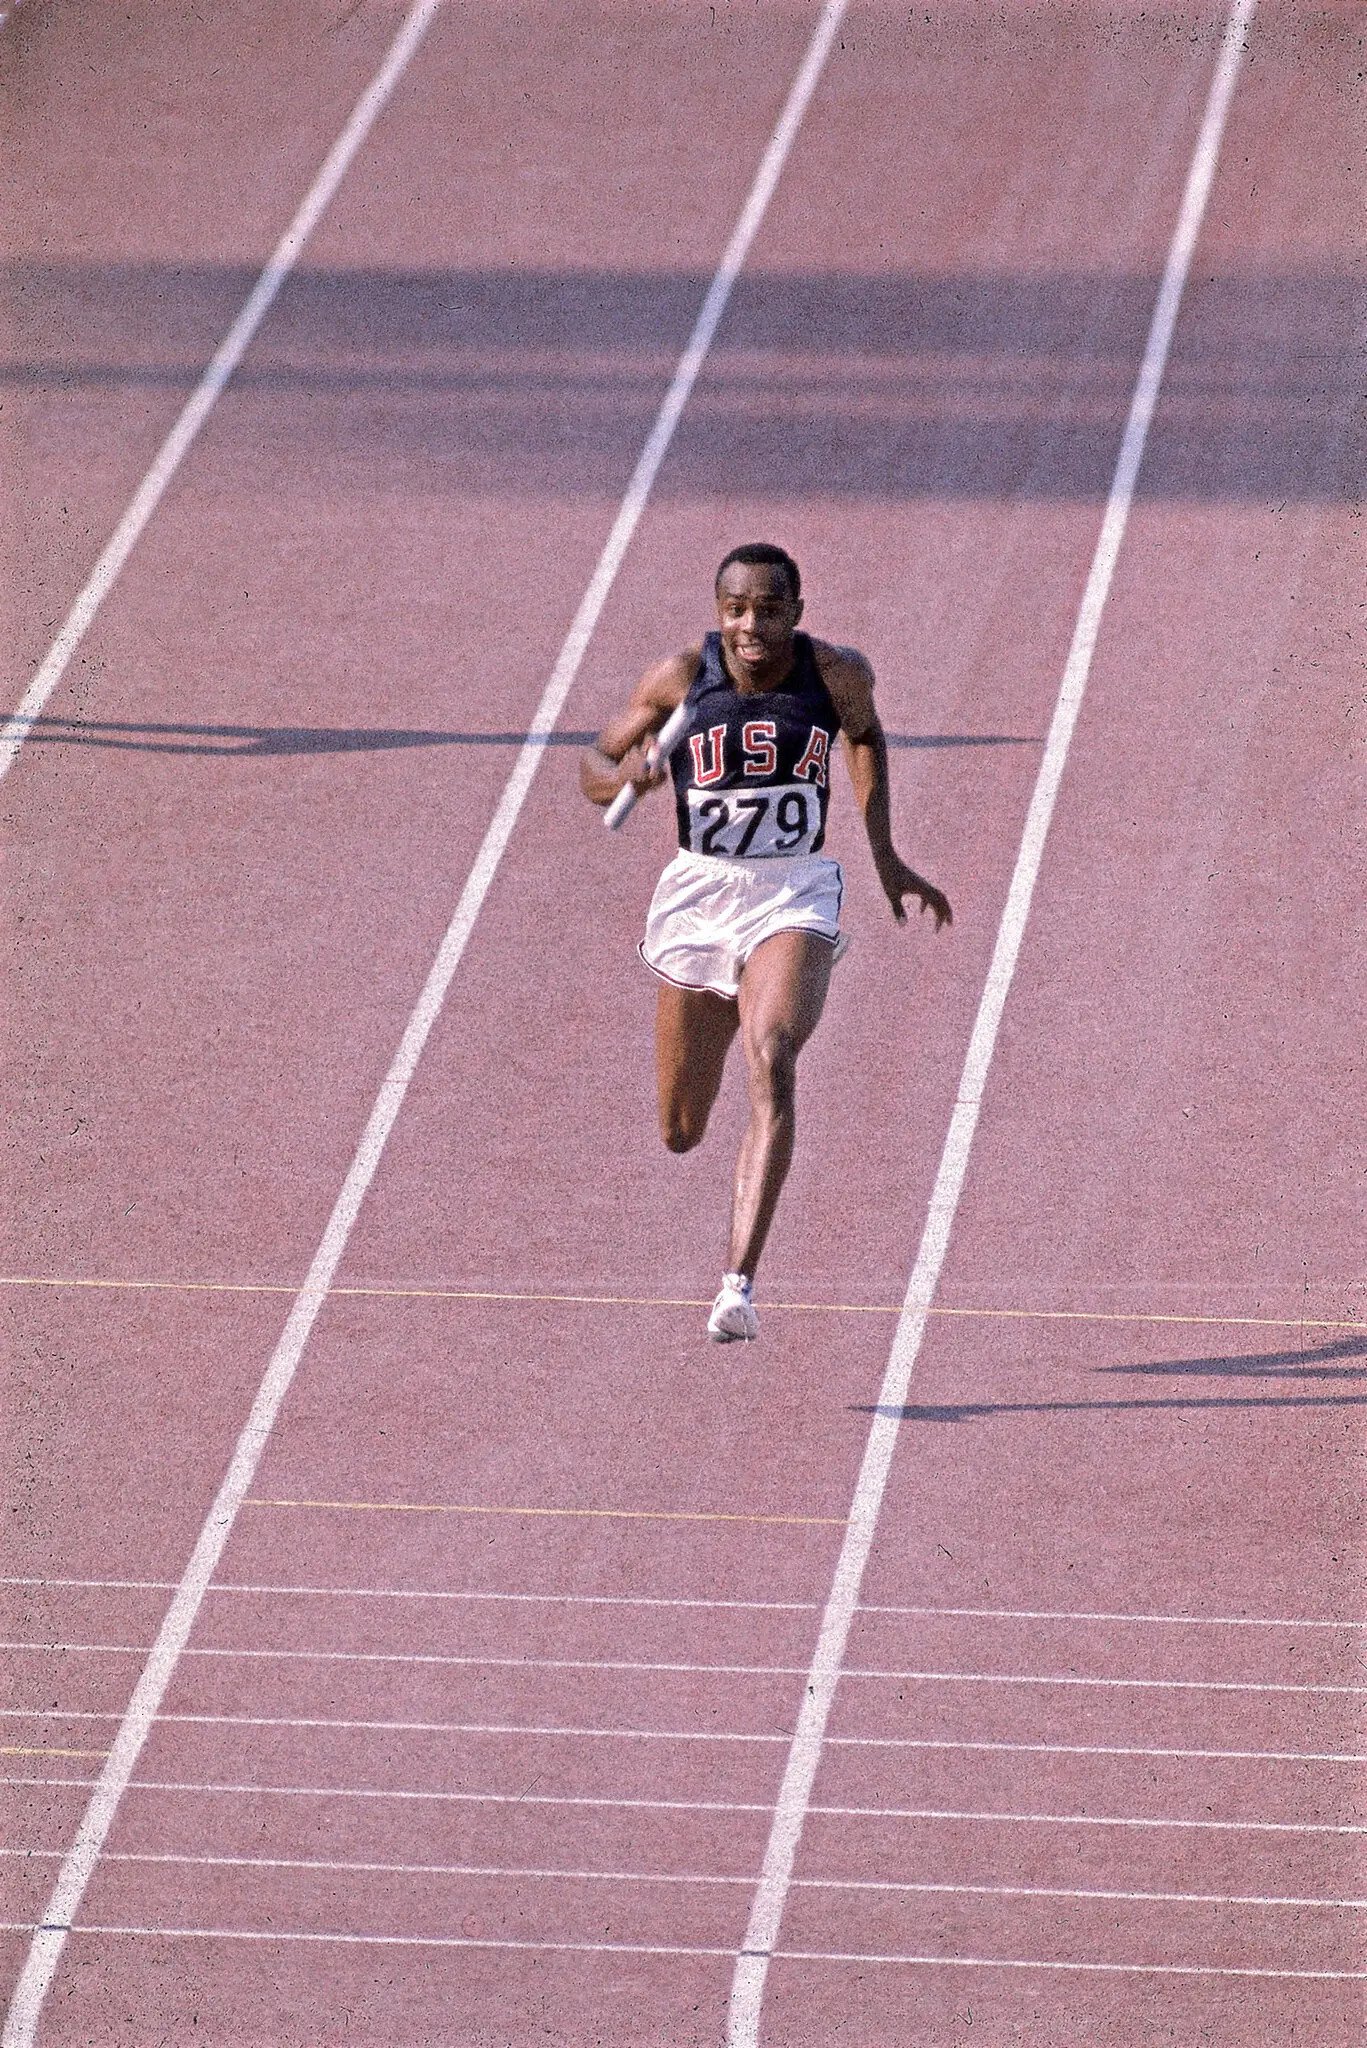 Jim Hines, First to Sprint 100 Meters in Under 10 Seconds, Dies at 76